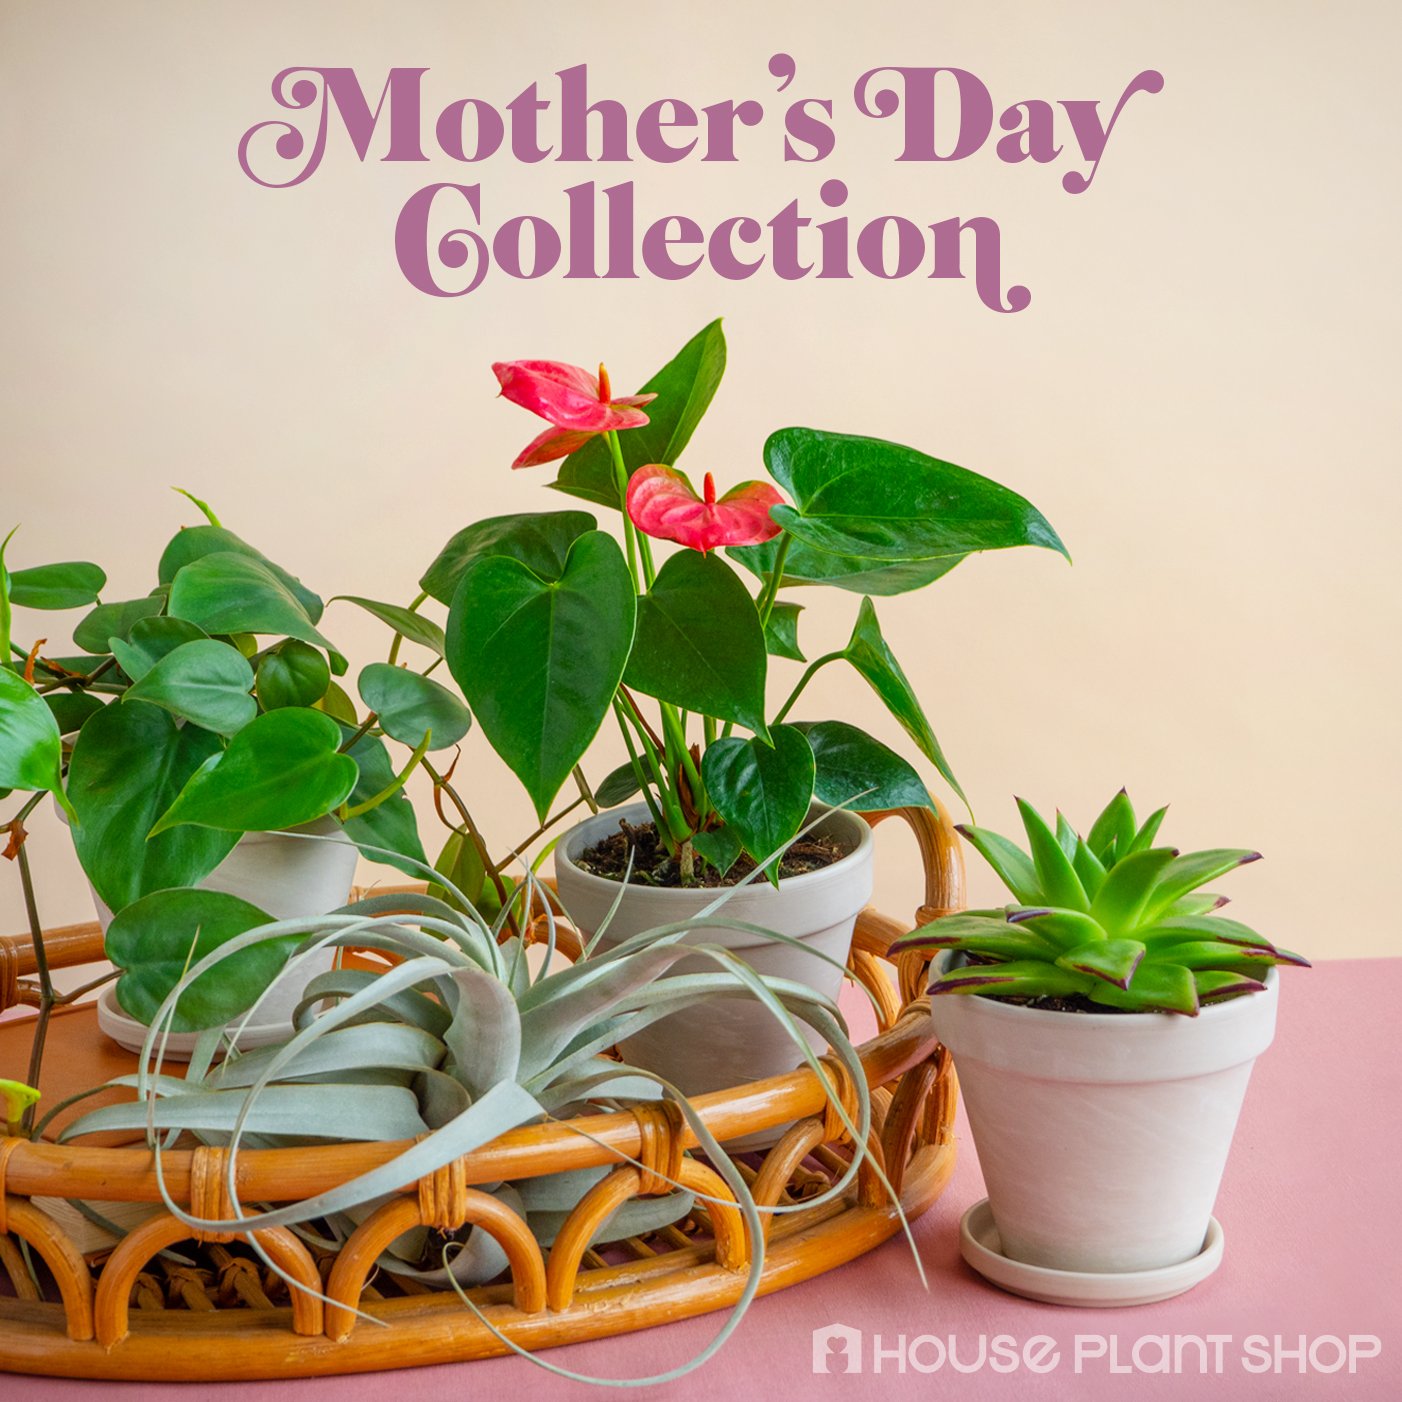 Explore our exceptional collection of houseplants for Mother's Day at the best plant nursery near me.